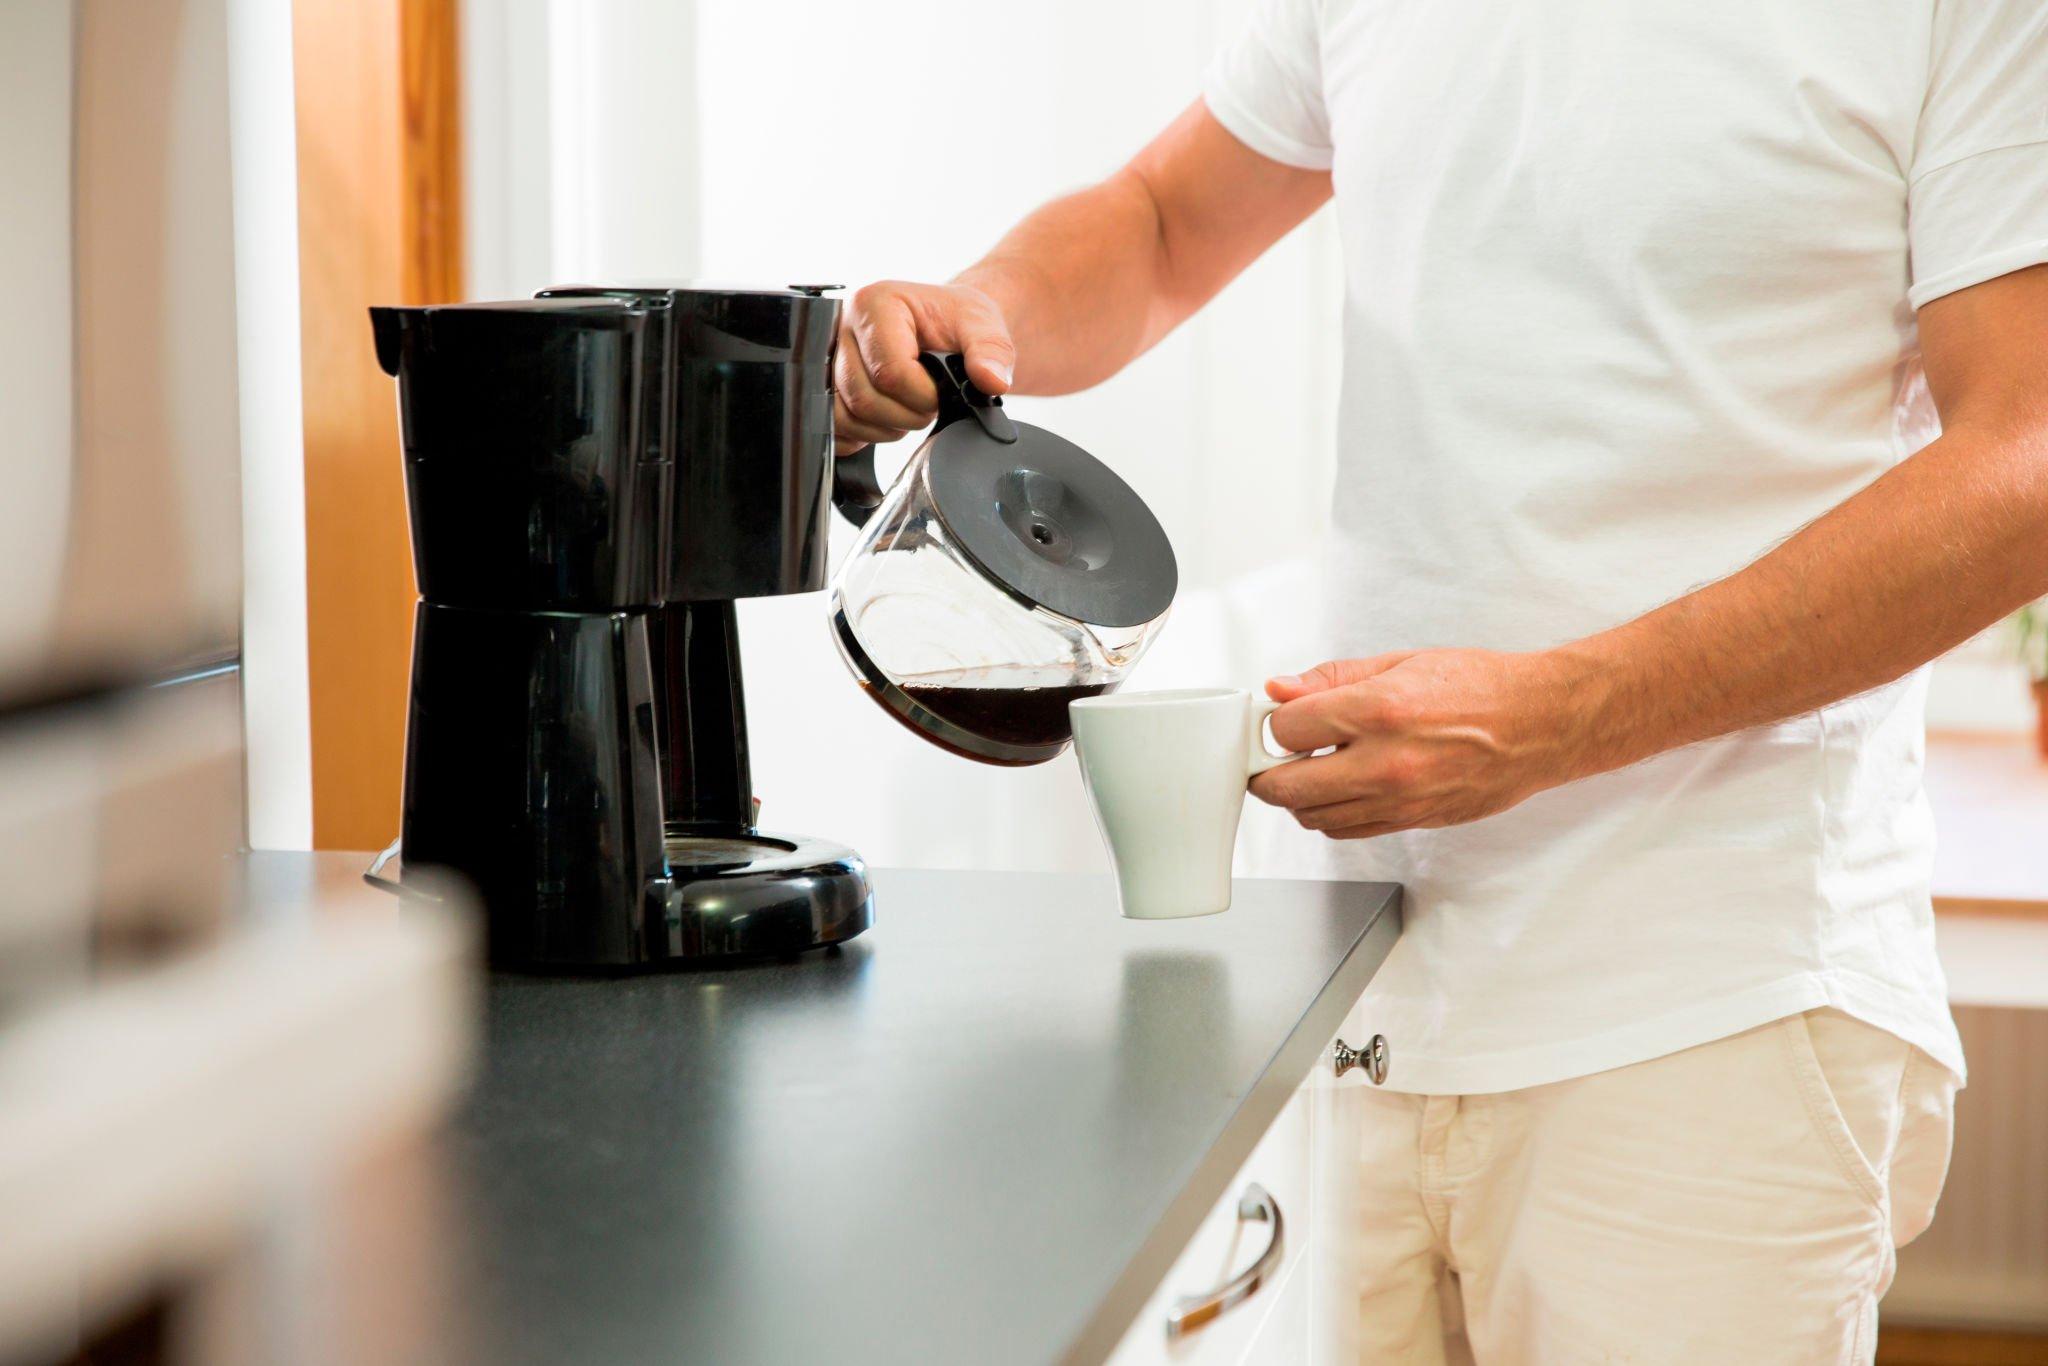 Find the best coffee maker for Airbnb: Compare features, prices & reviews to choose the perfect one.